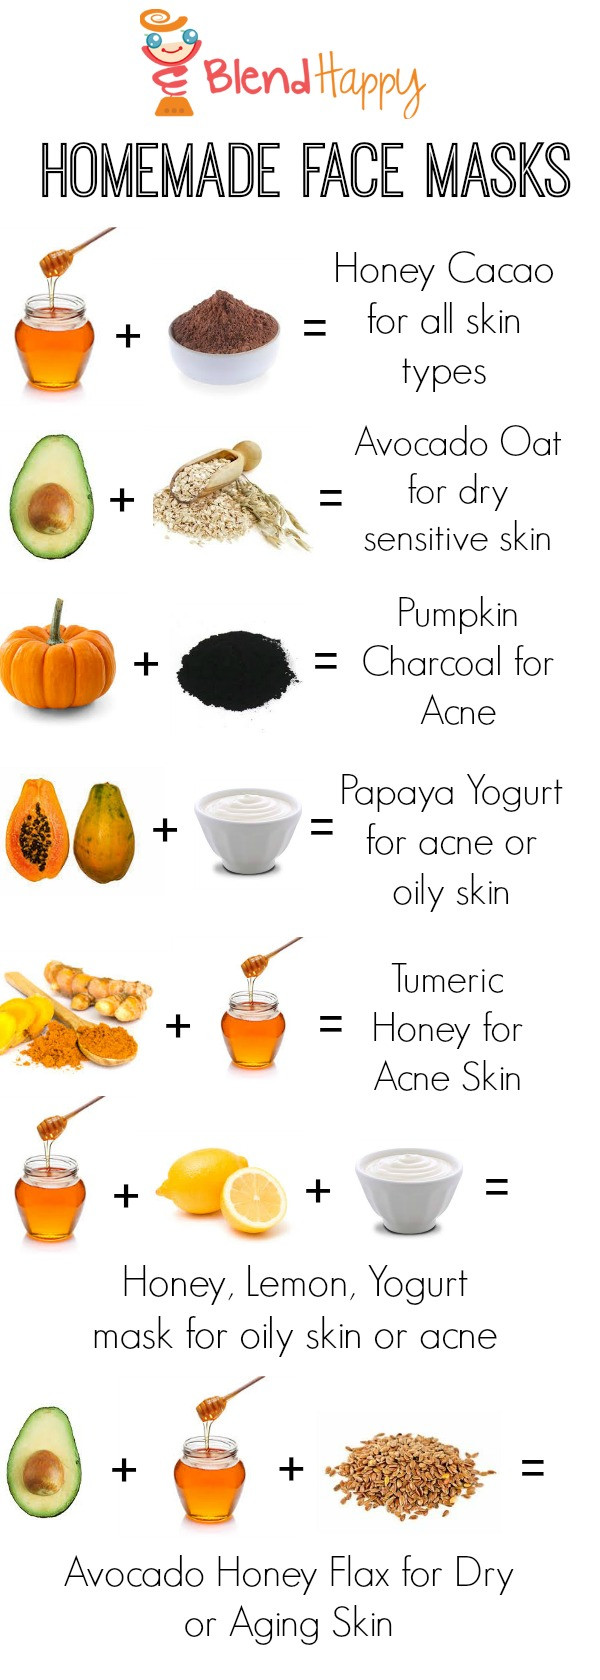 DIY Homemade Face Mask
 10 Foods You Can Turn into Homemade Face Masks Blendhappy